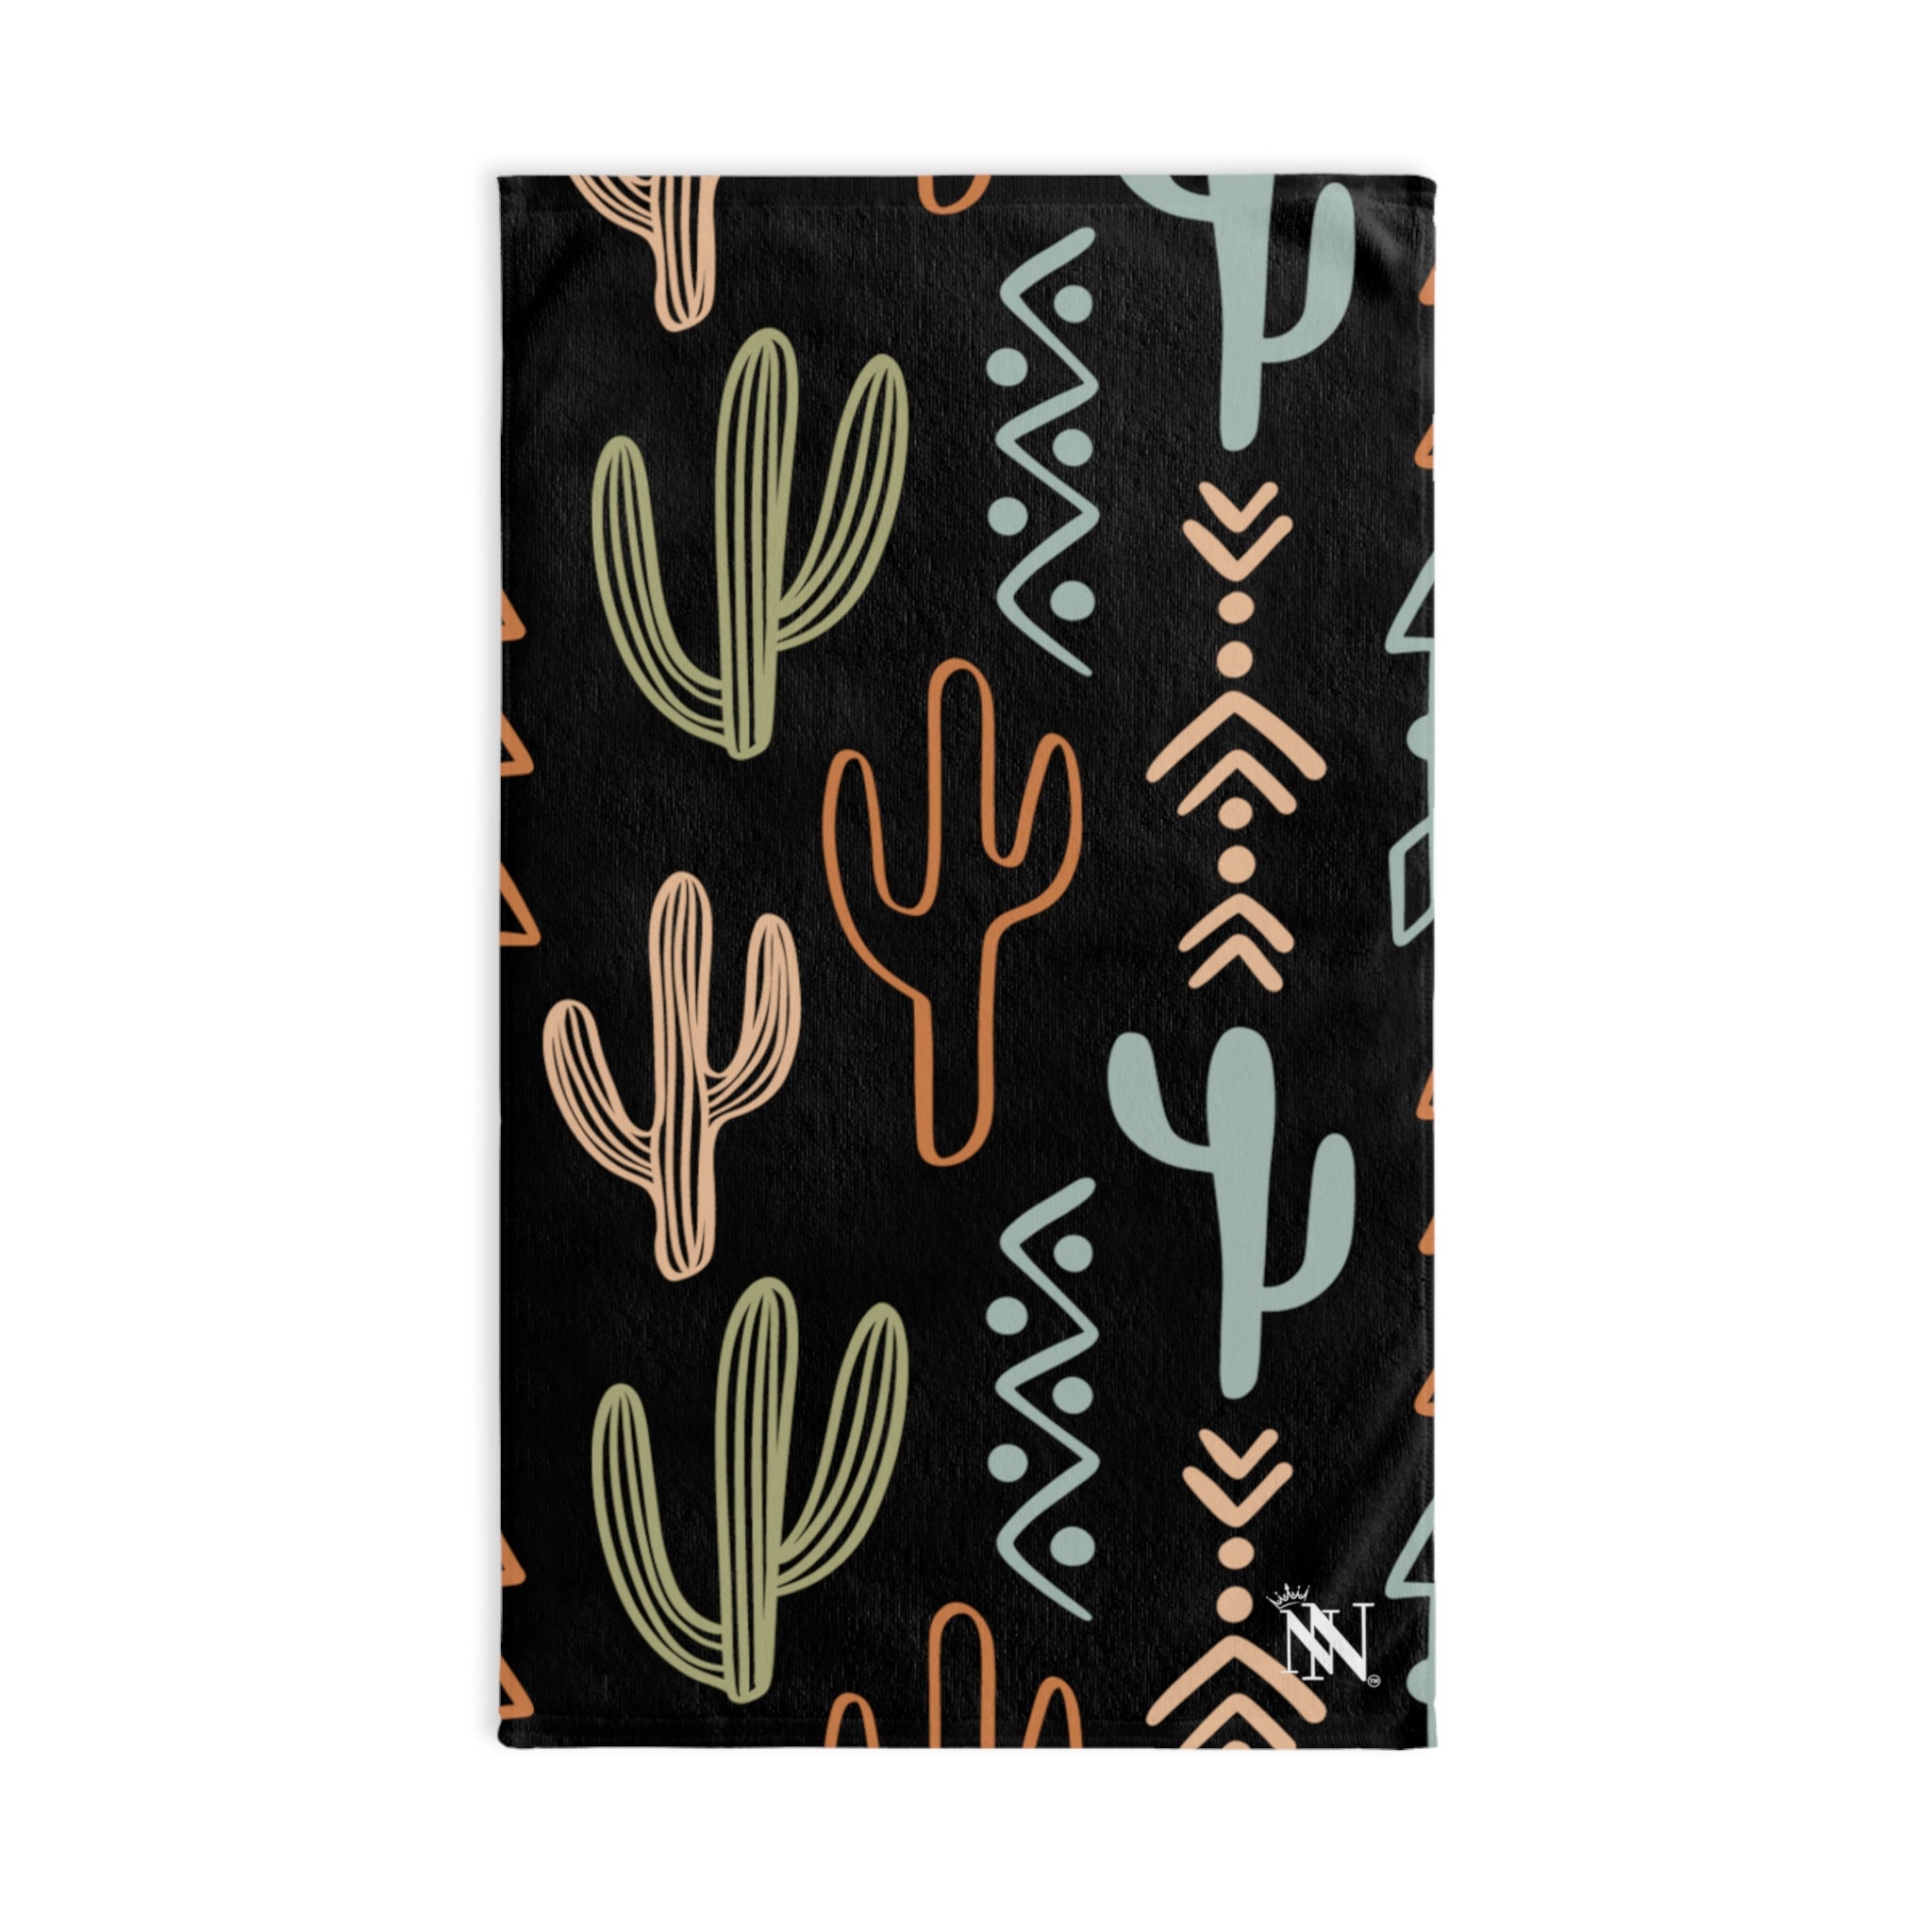 Cactus Western Black | Sexy Gifts for Boyfriend, Funny Towel Romantic Gift for Wedding Couple Fiance First Year 2nd Anniversary Valentines, Party Gag Gifts, Joke Humor Cloth for Husband Men BF NECTAR NAPKINS